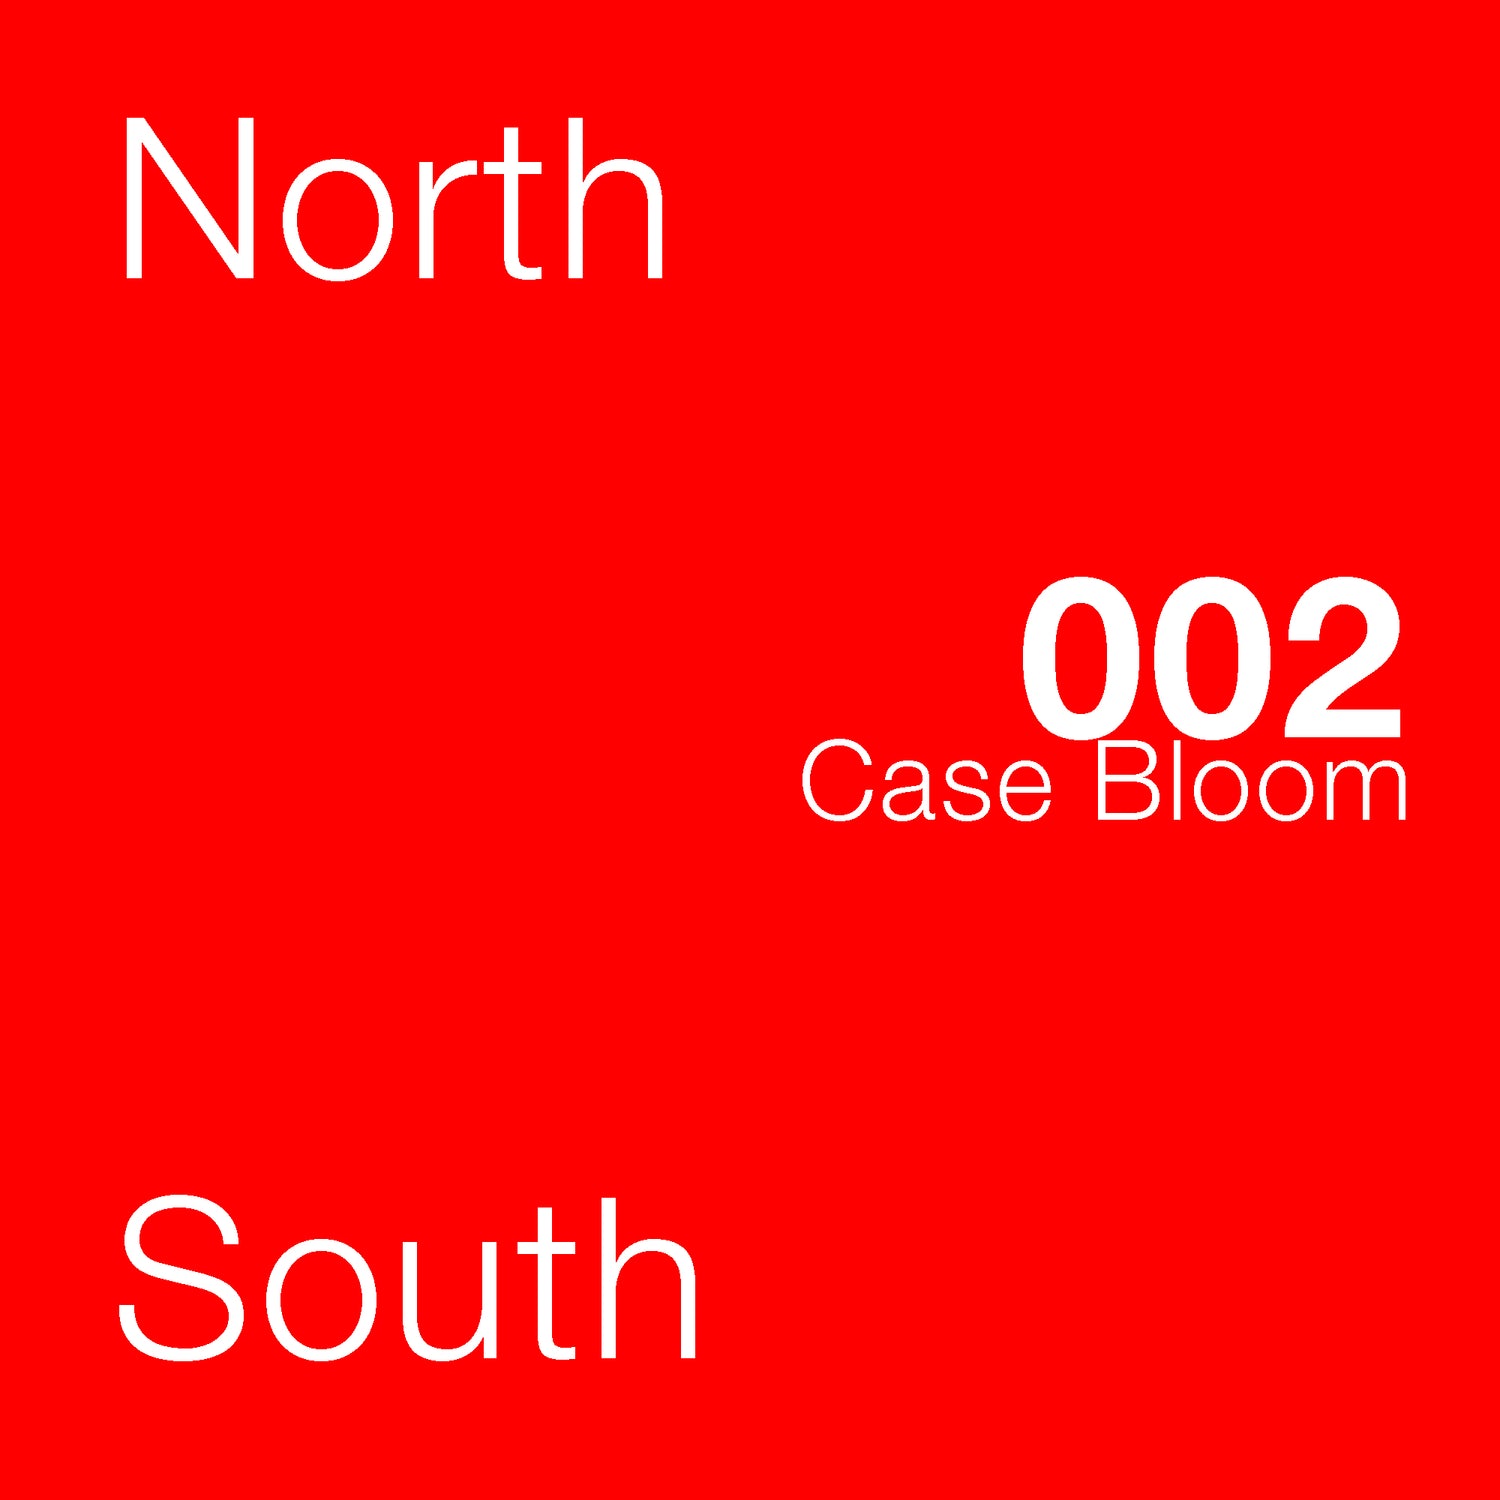 North to South: 002